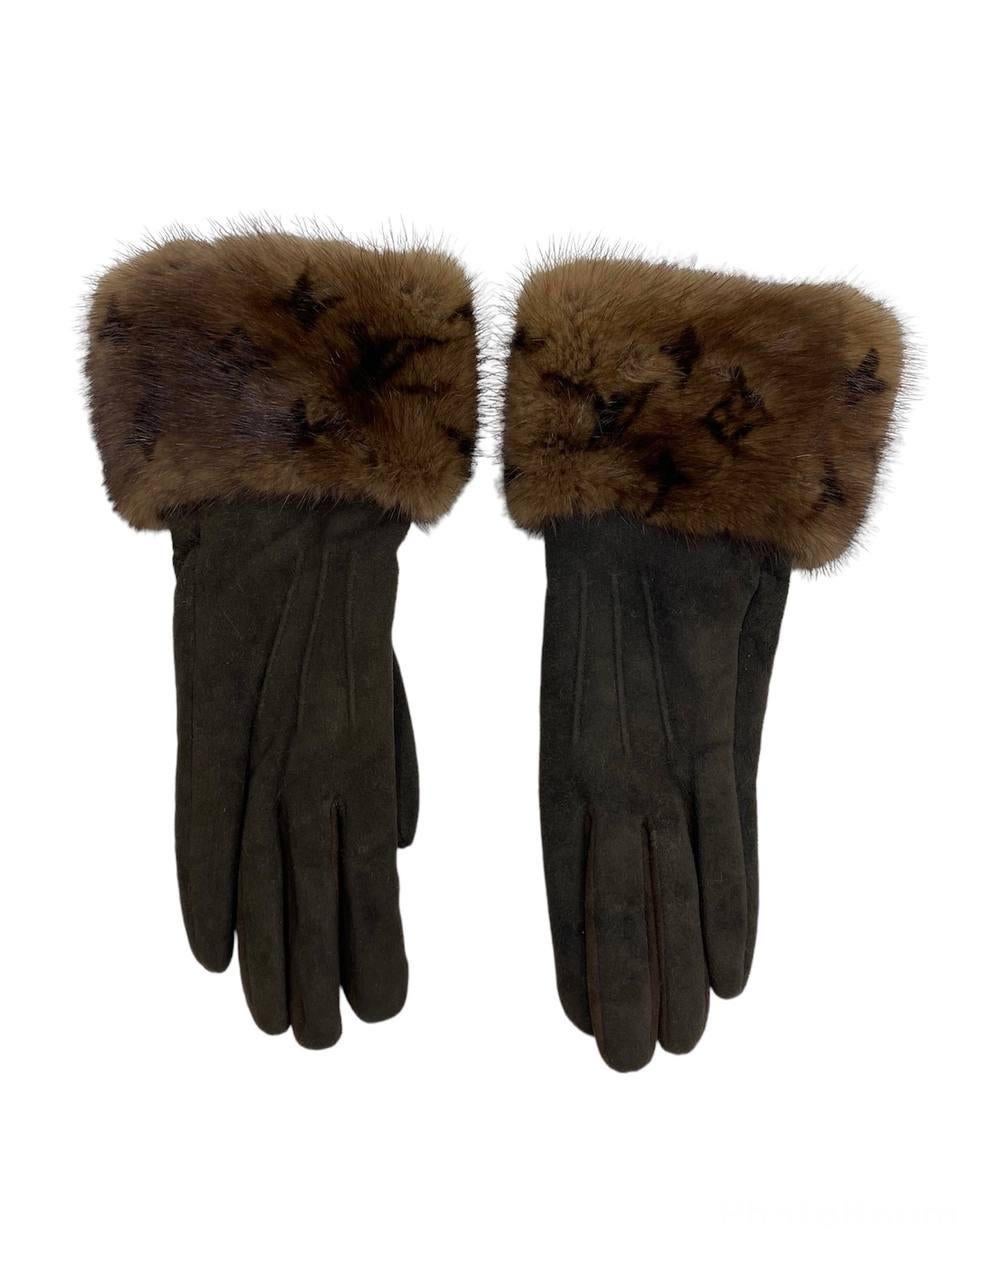 Fantastic Louis Vuitton gloves in mink with fire-branded logo.
Very good condition.Size S.